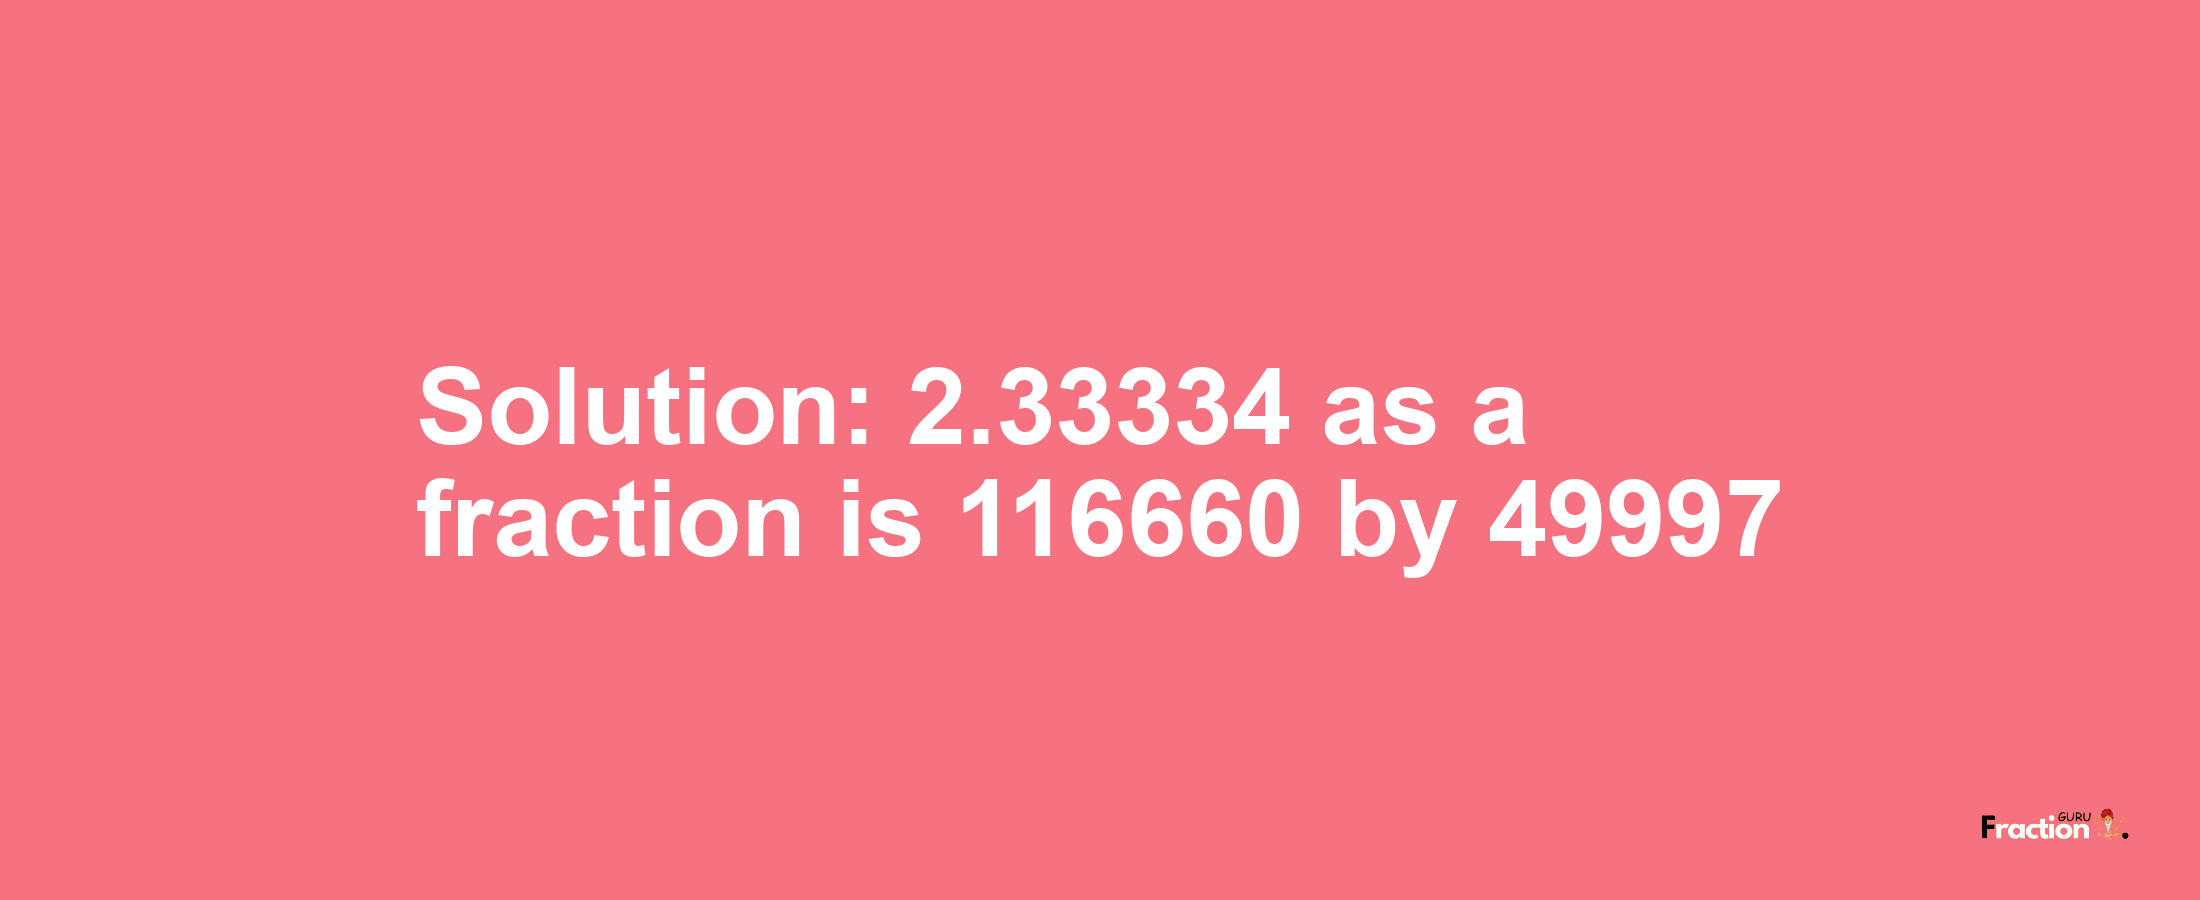 Solution:2.33334 as a fraction is 116660/49997